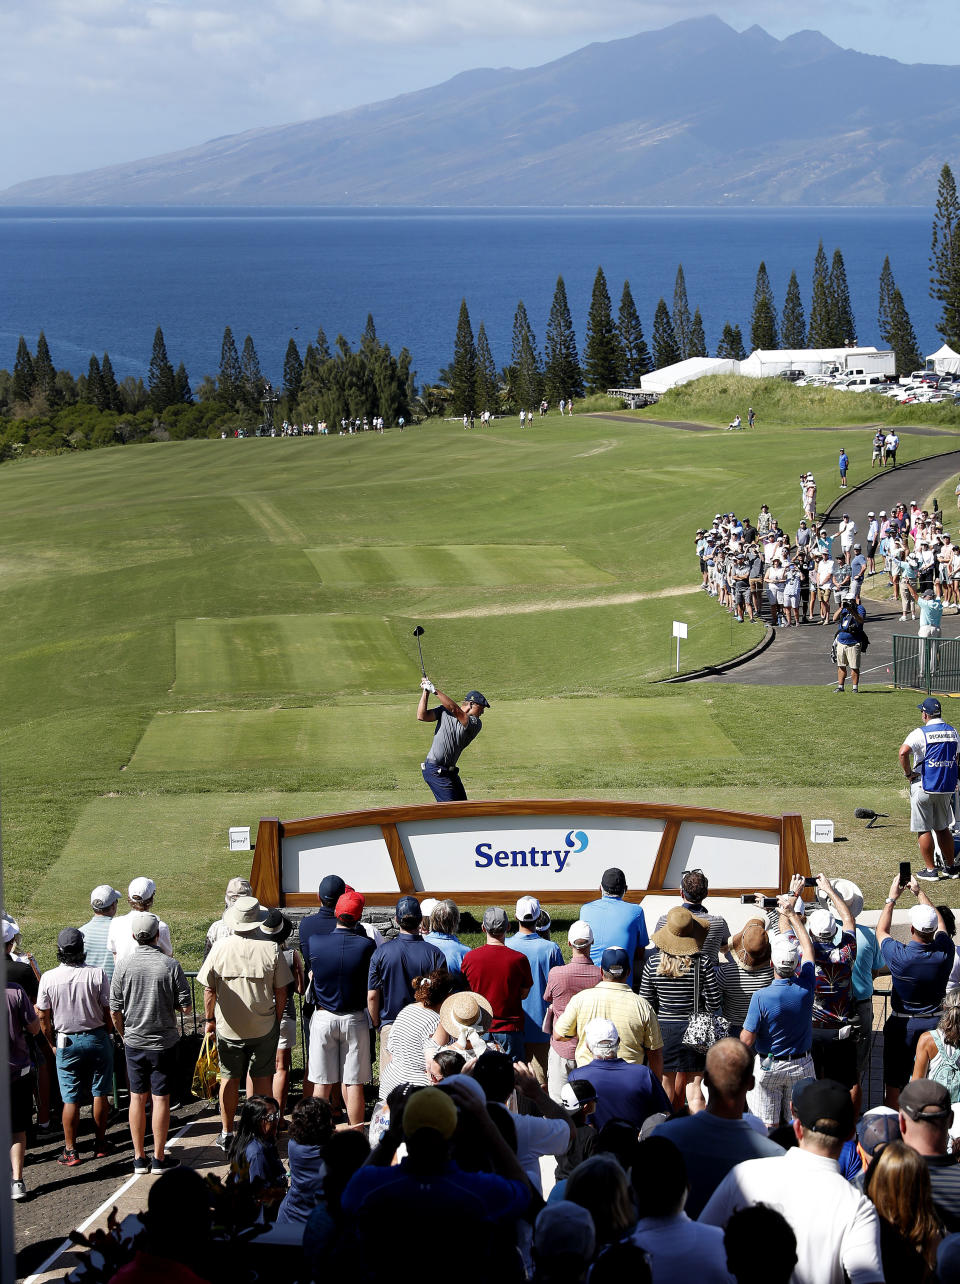 Bryson Dechambeau plays his shot from the first tee during the final round of the Tournament of Champions golf event, Sunday, Jan. 6, 2019, at Kapalua Plantation Course in Kapalua, Hawaii. (AP Photo/Matt York)